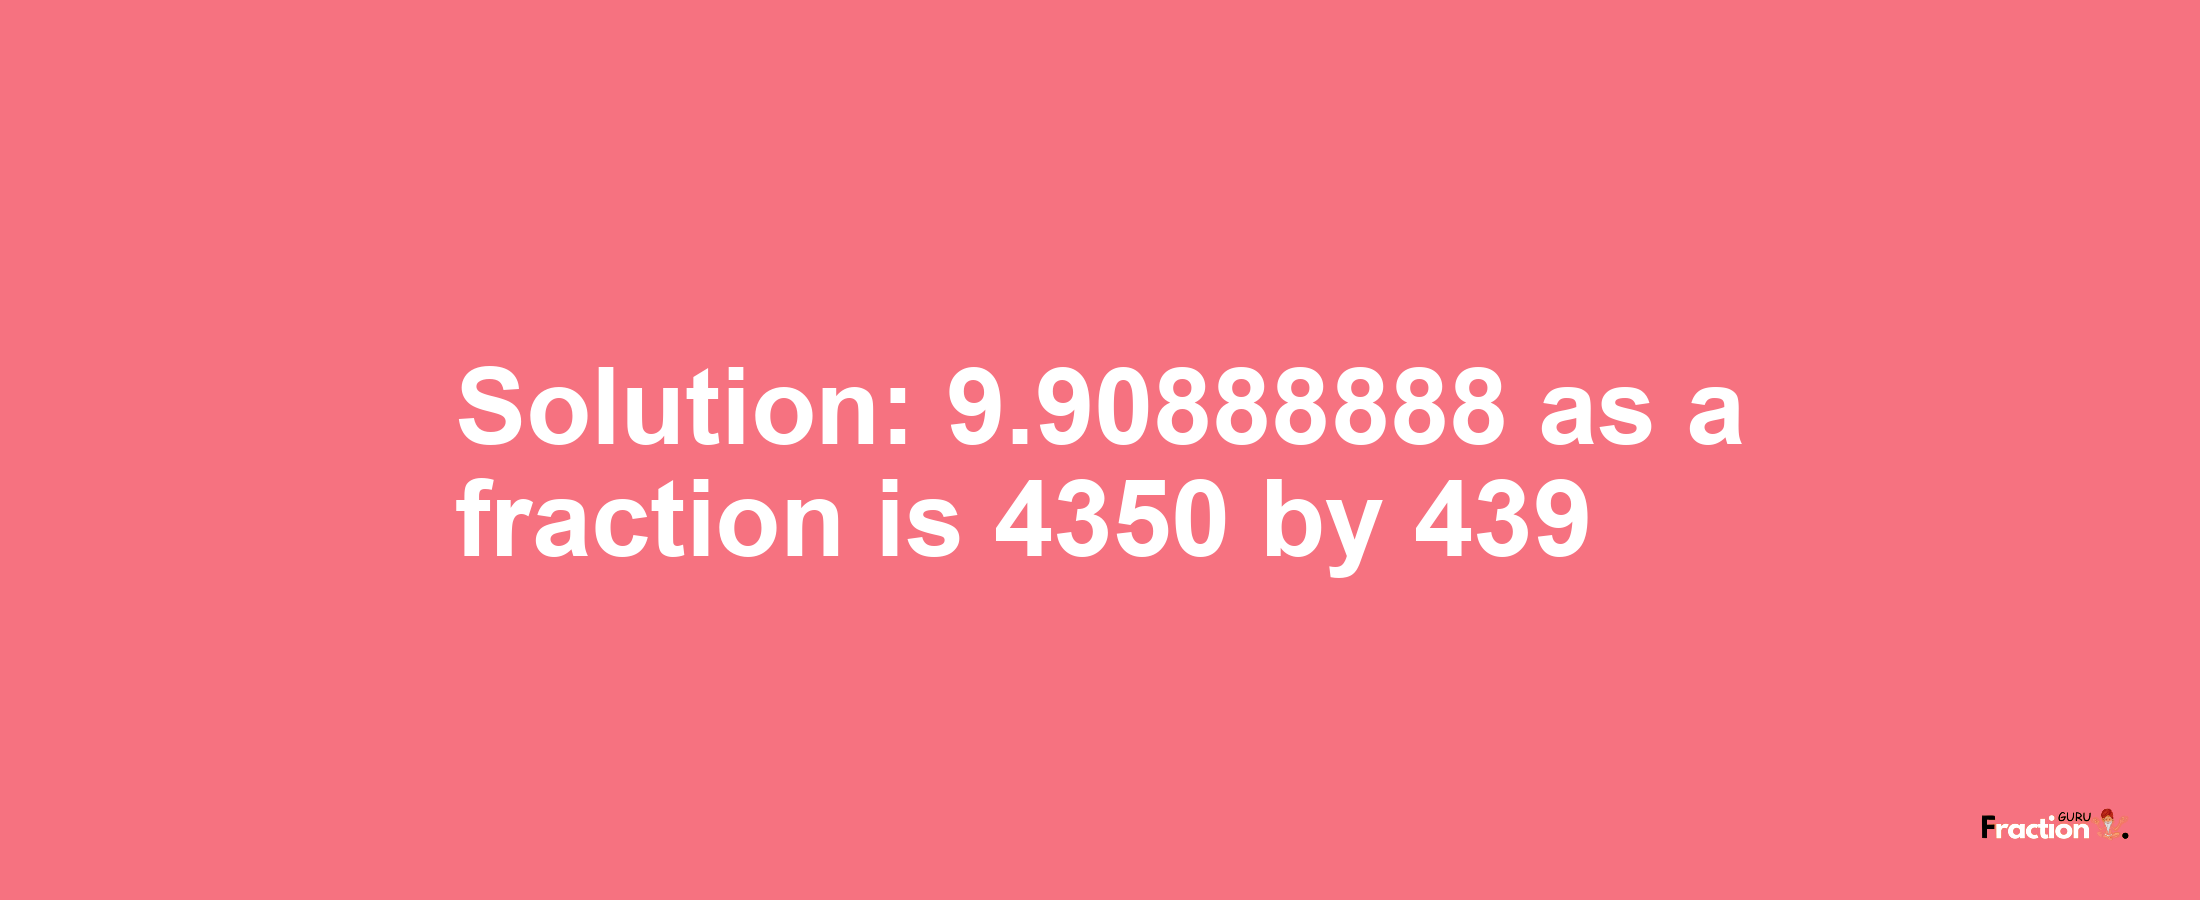 Solution:9.90888888 as a fraction is 4350/439